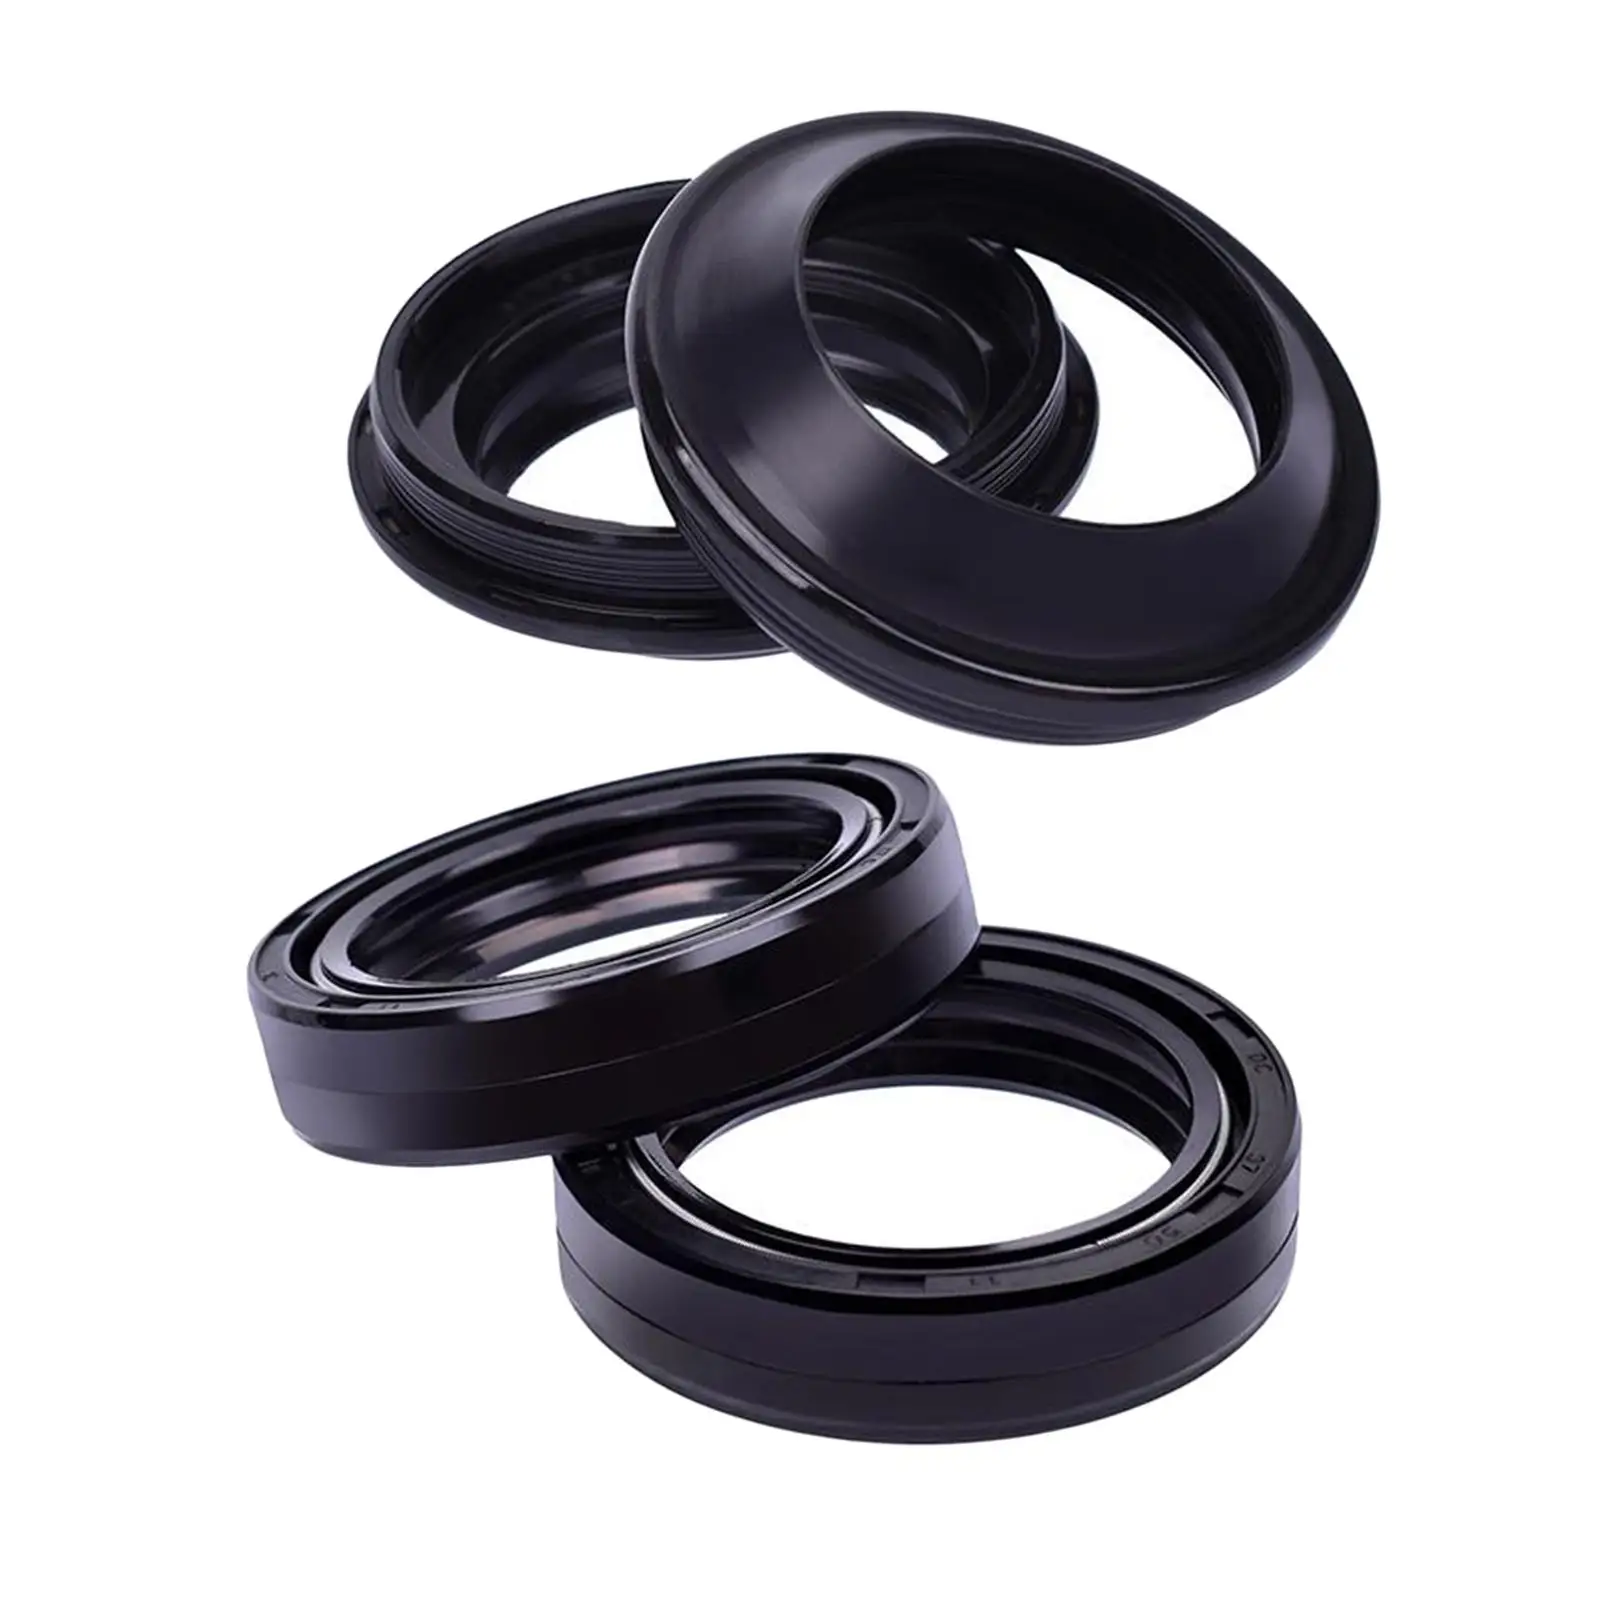 Motorcycle Front Shock Absorber Oil Seals Set 37x50x11mm  CBR250RA  XR500R